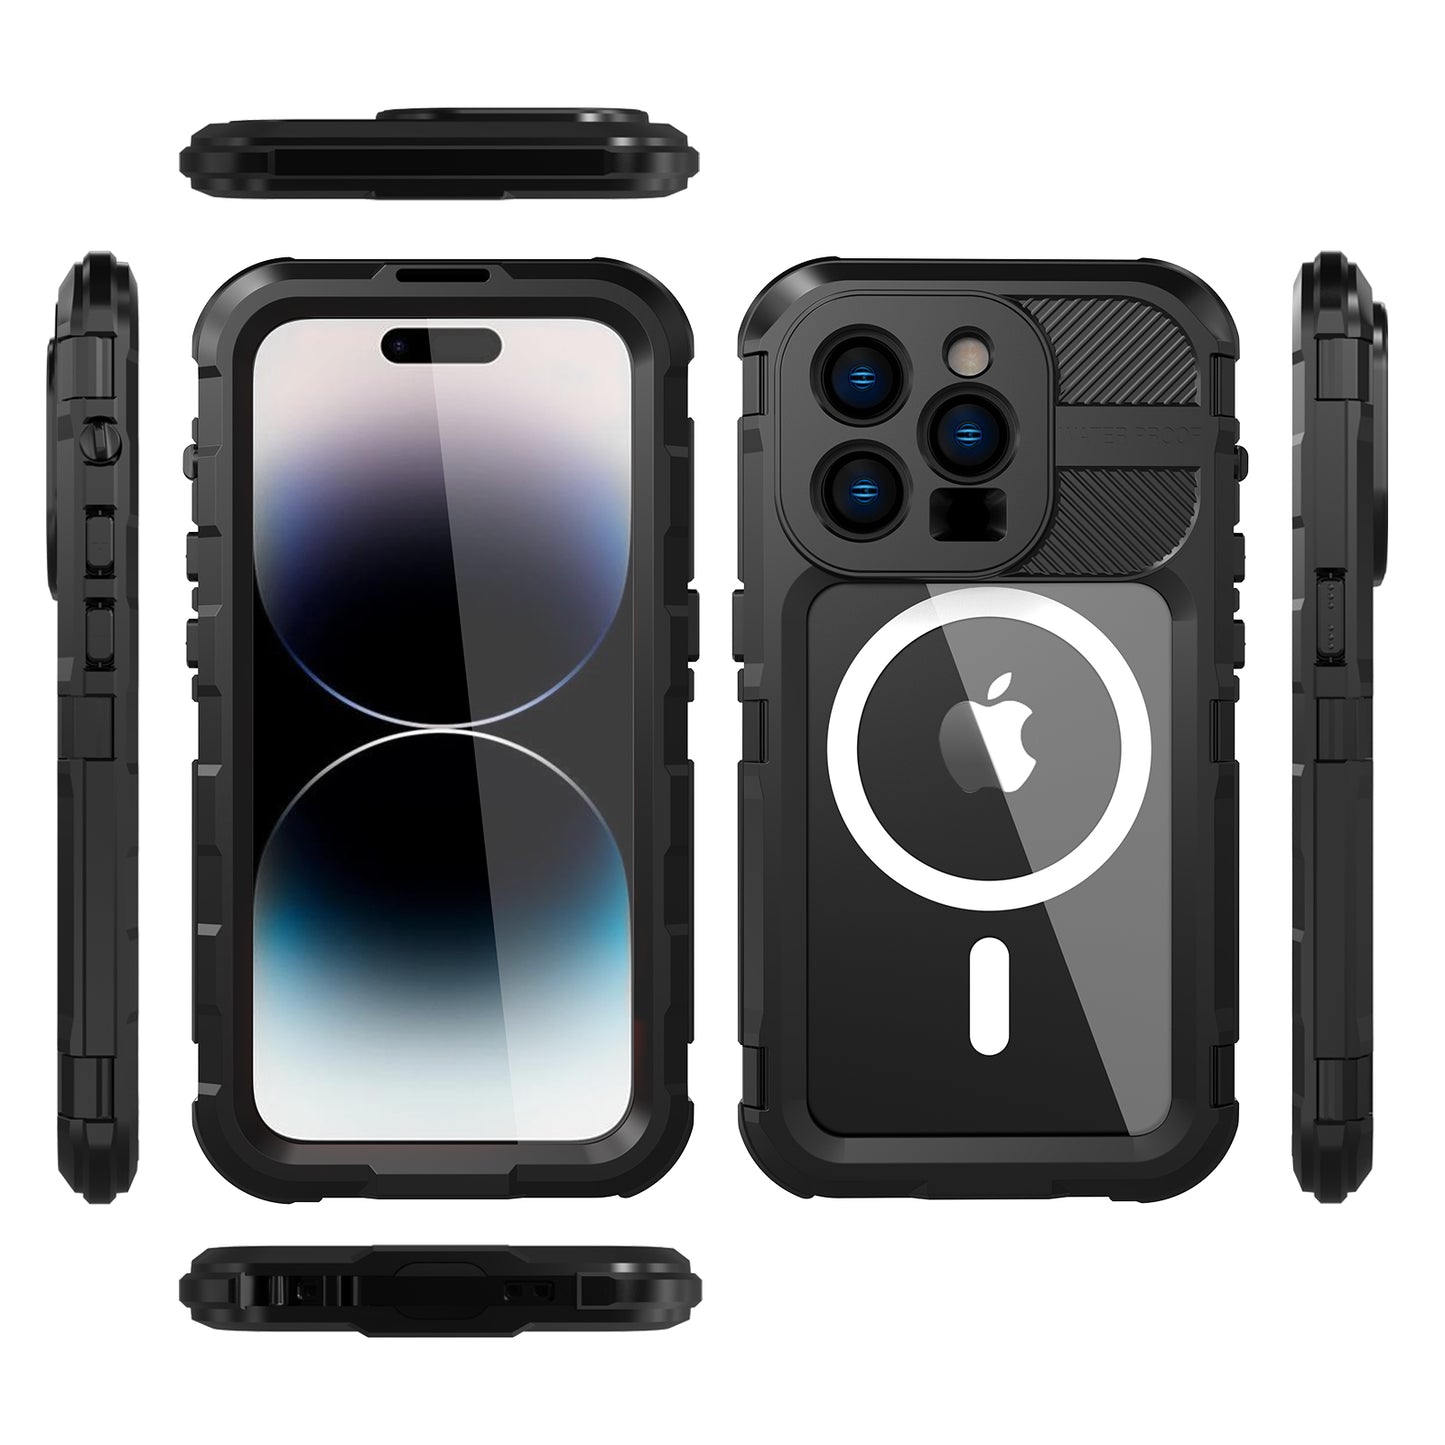 Kylin Armor Extreme IP68 Waterproof Heavy Duty Case Cover